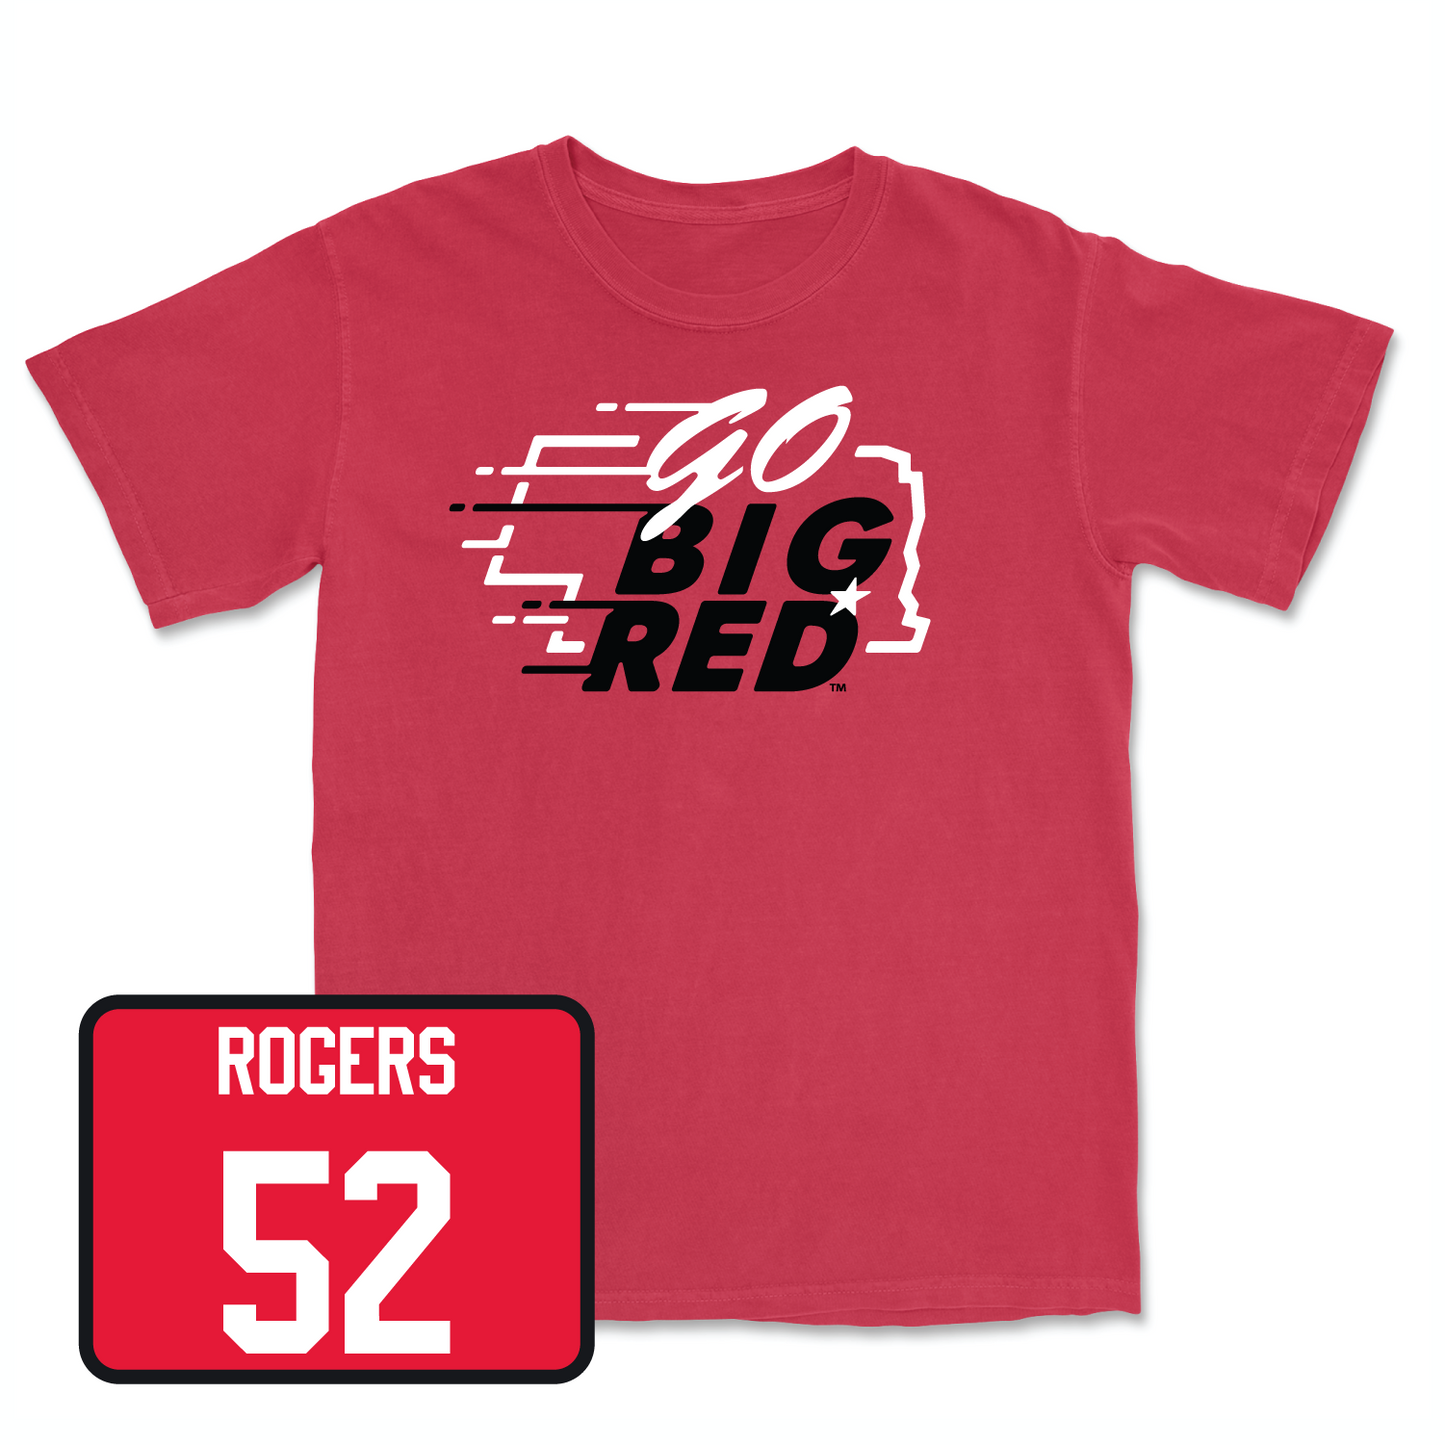 Red Football GBR Tee Small / Dylan Rogers | #52